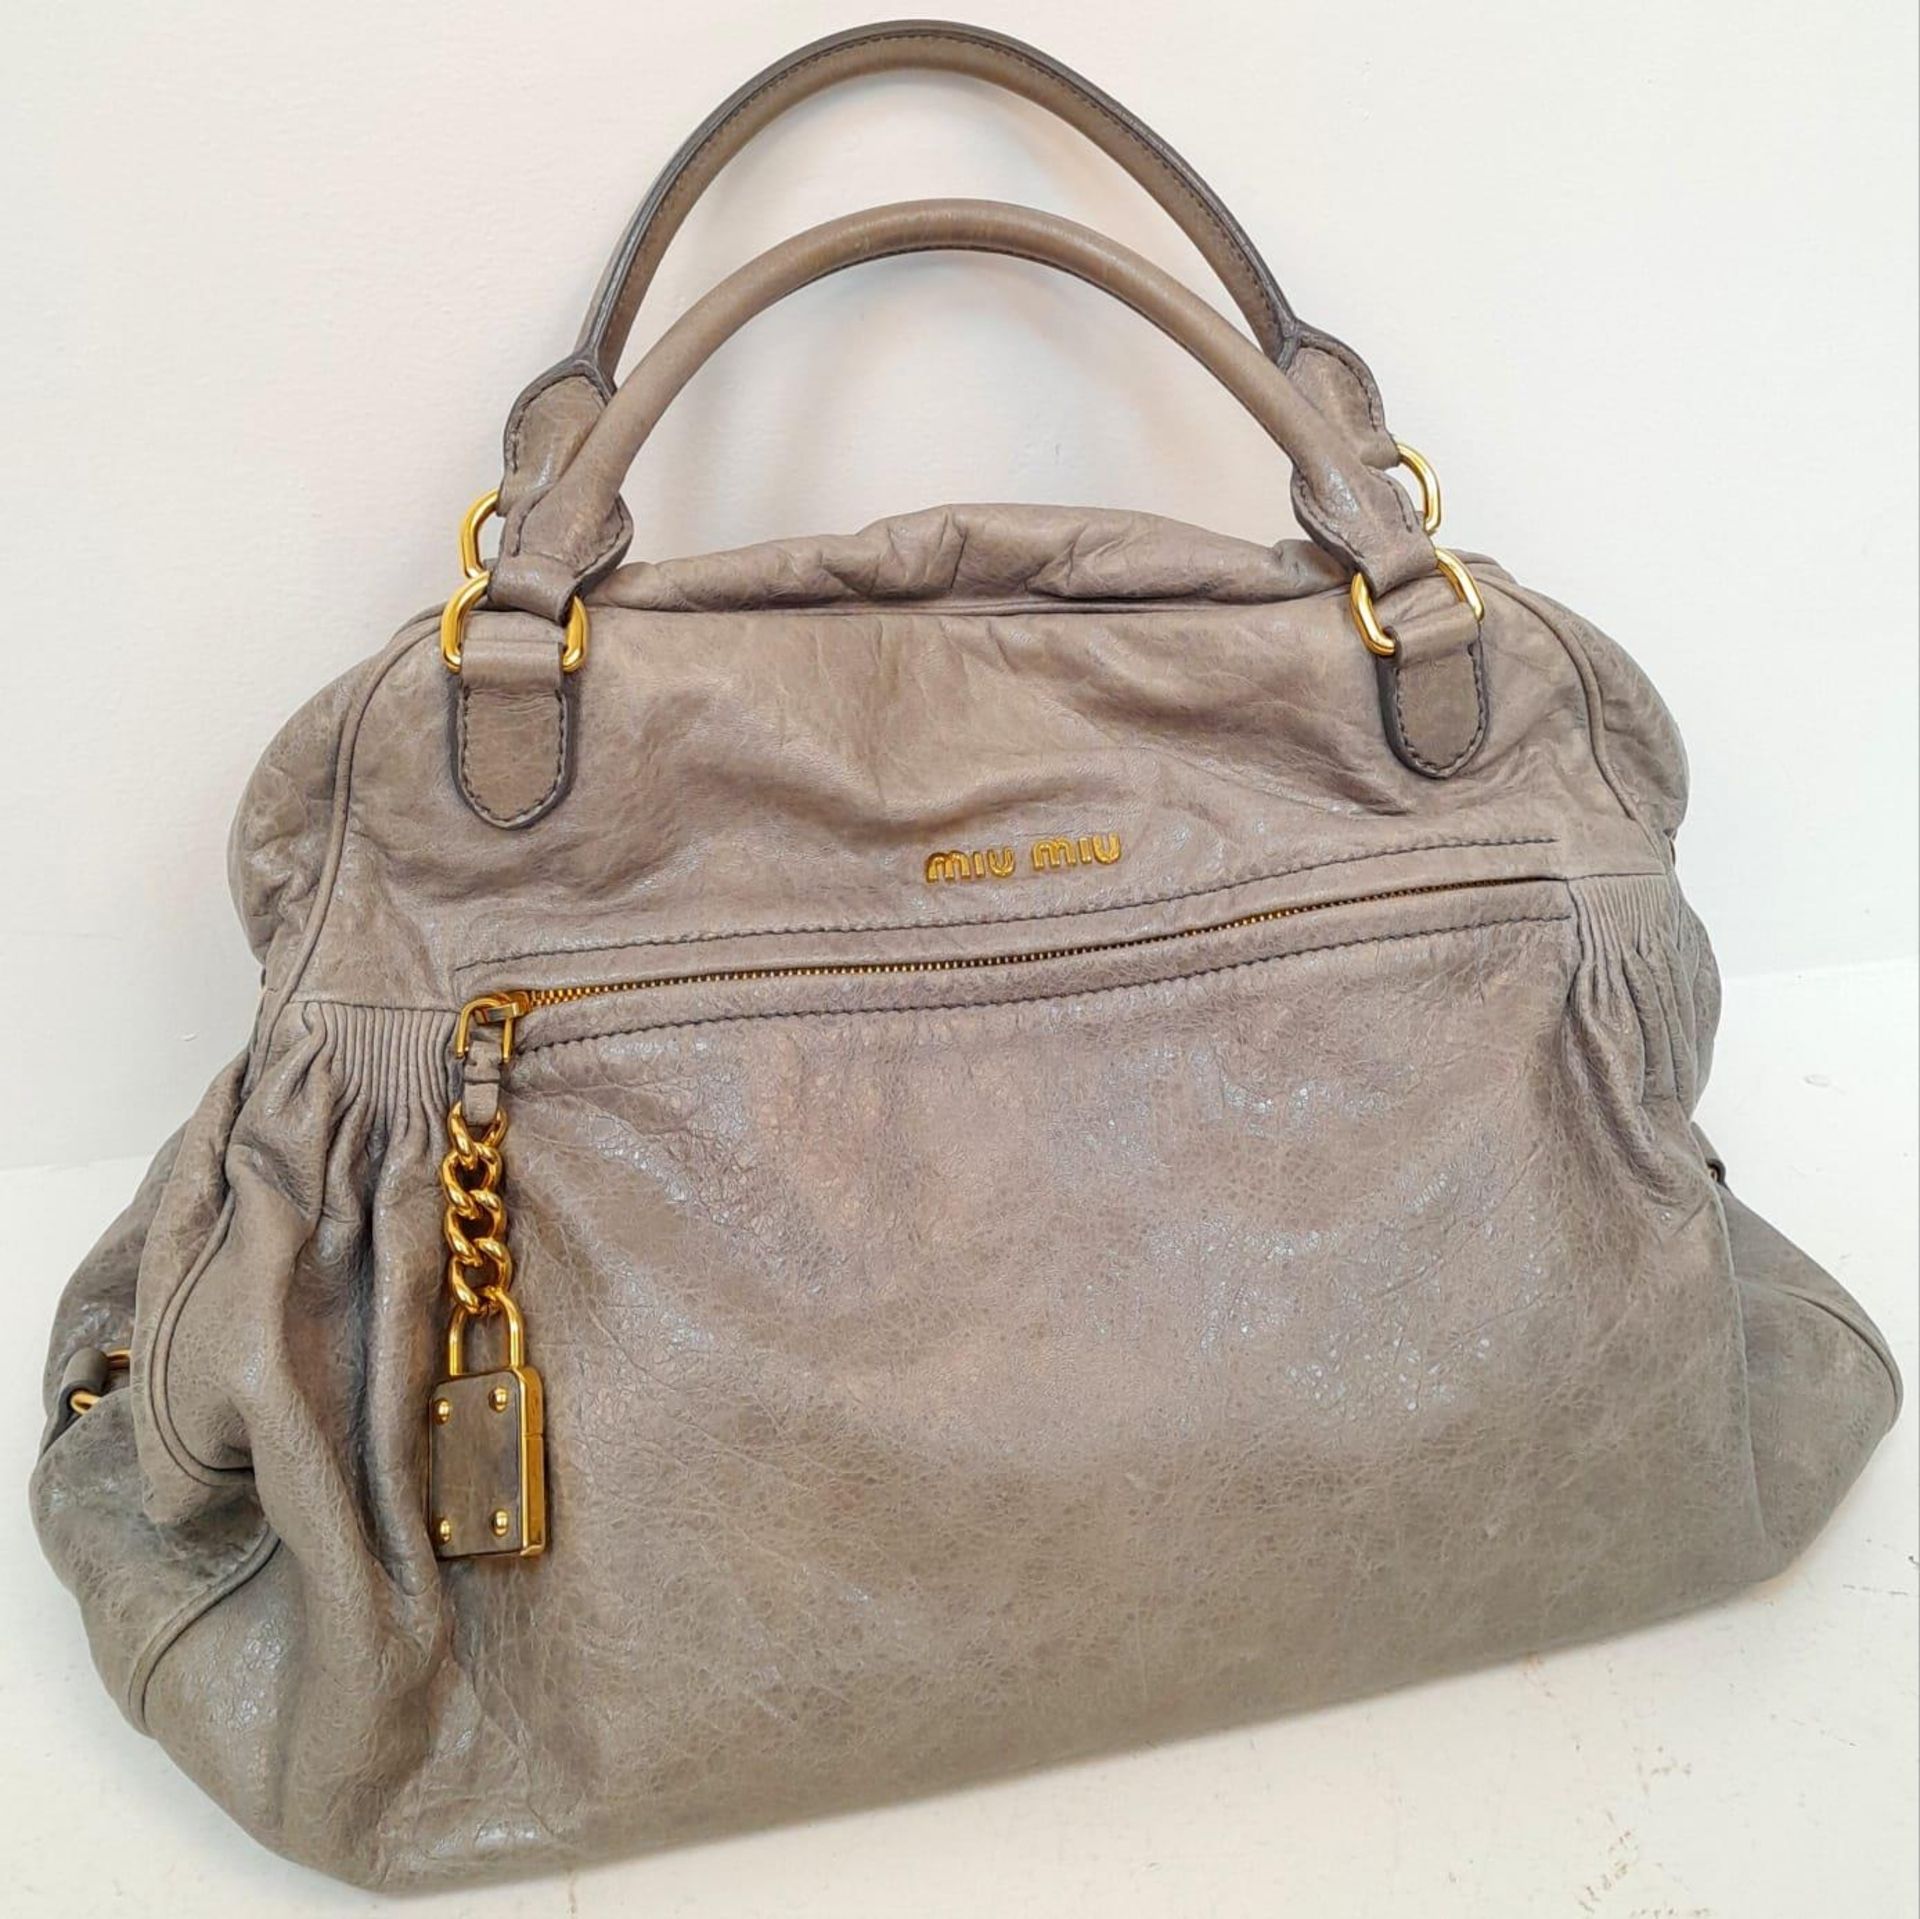 A Miu Miu Vitello Leather Handbag. Textured grey leather exterior with large zipped compartment.